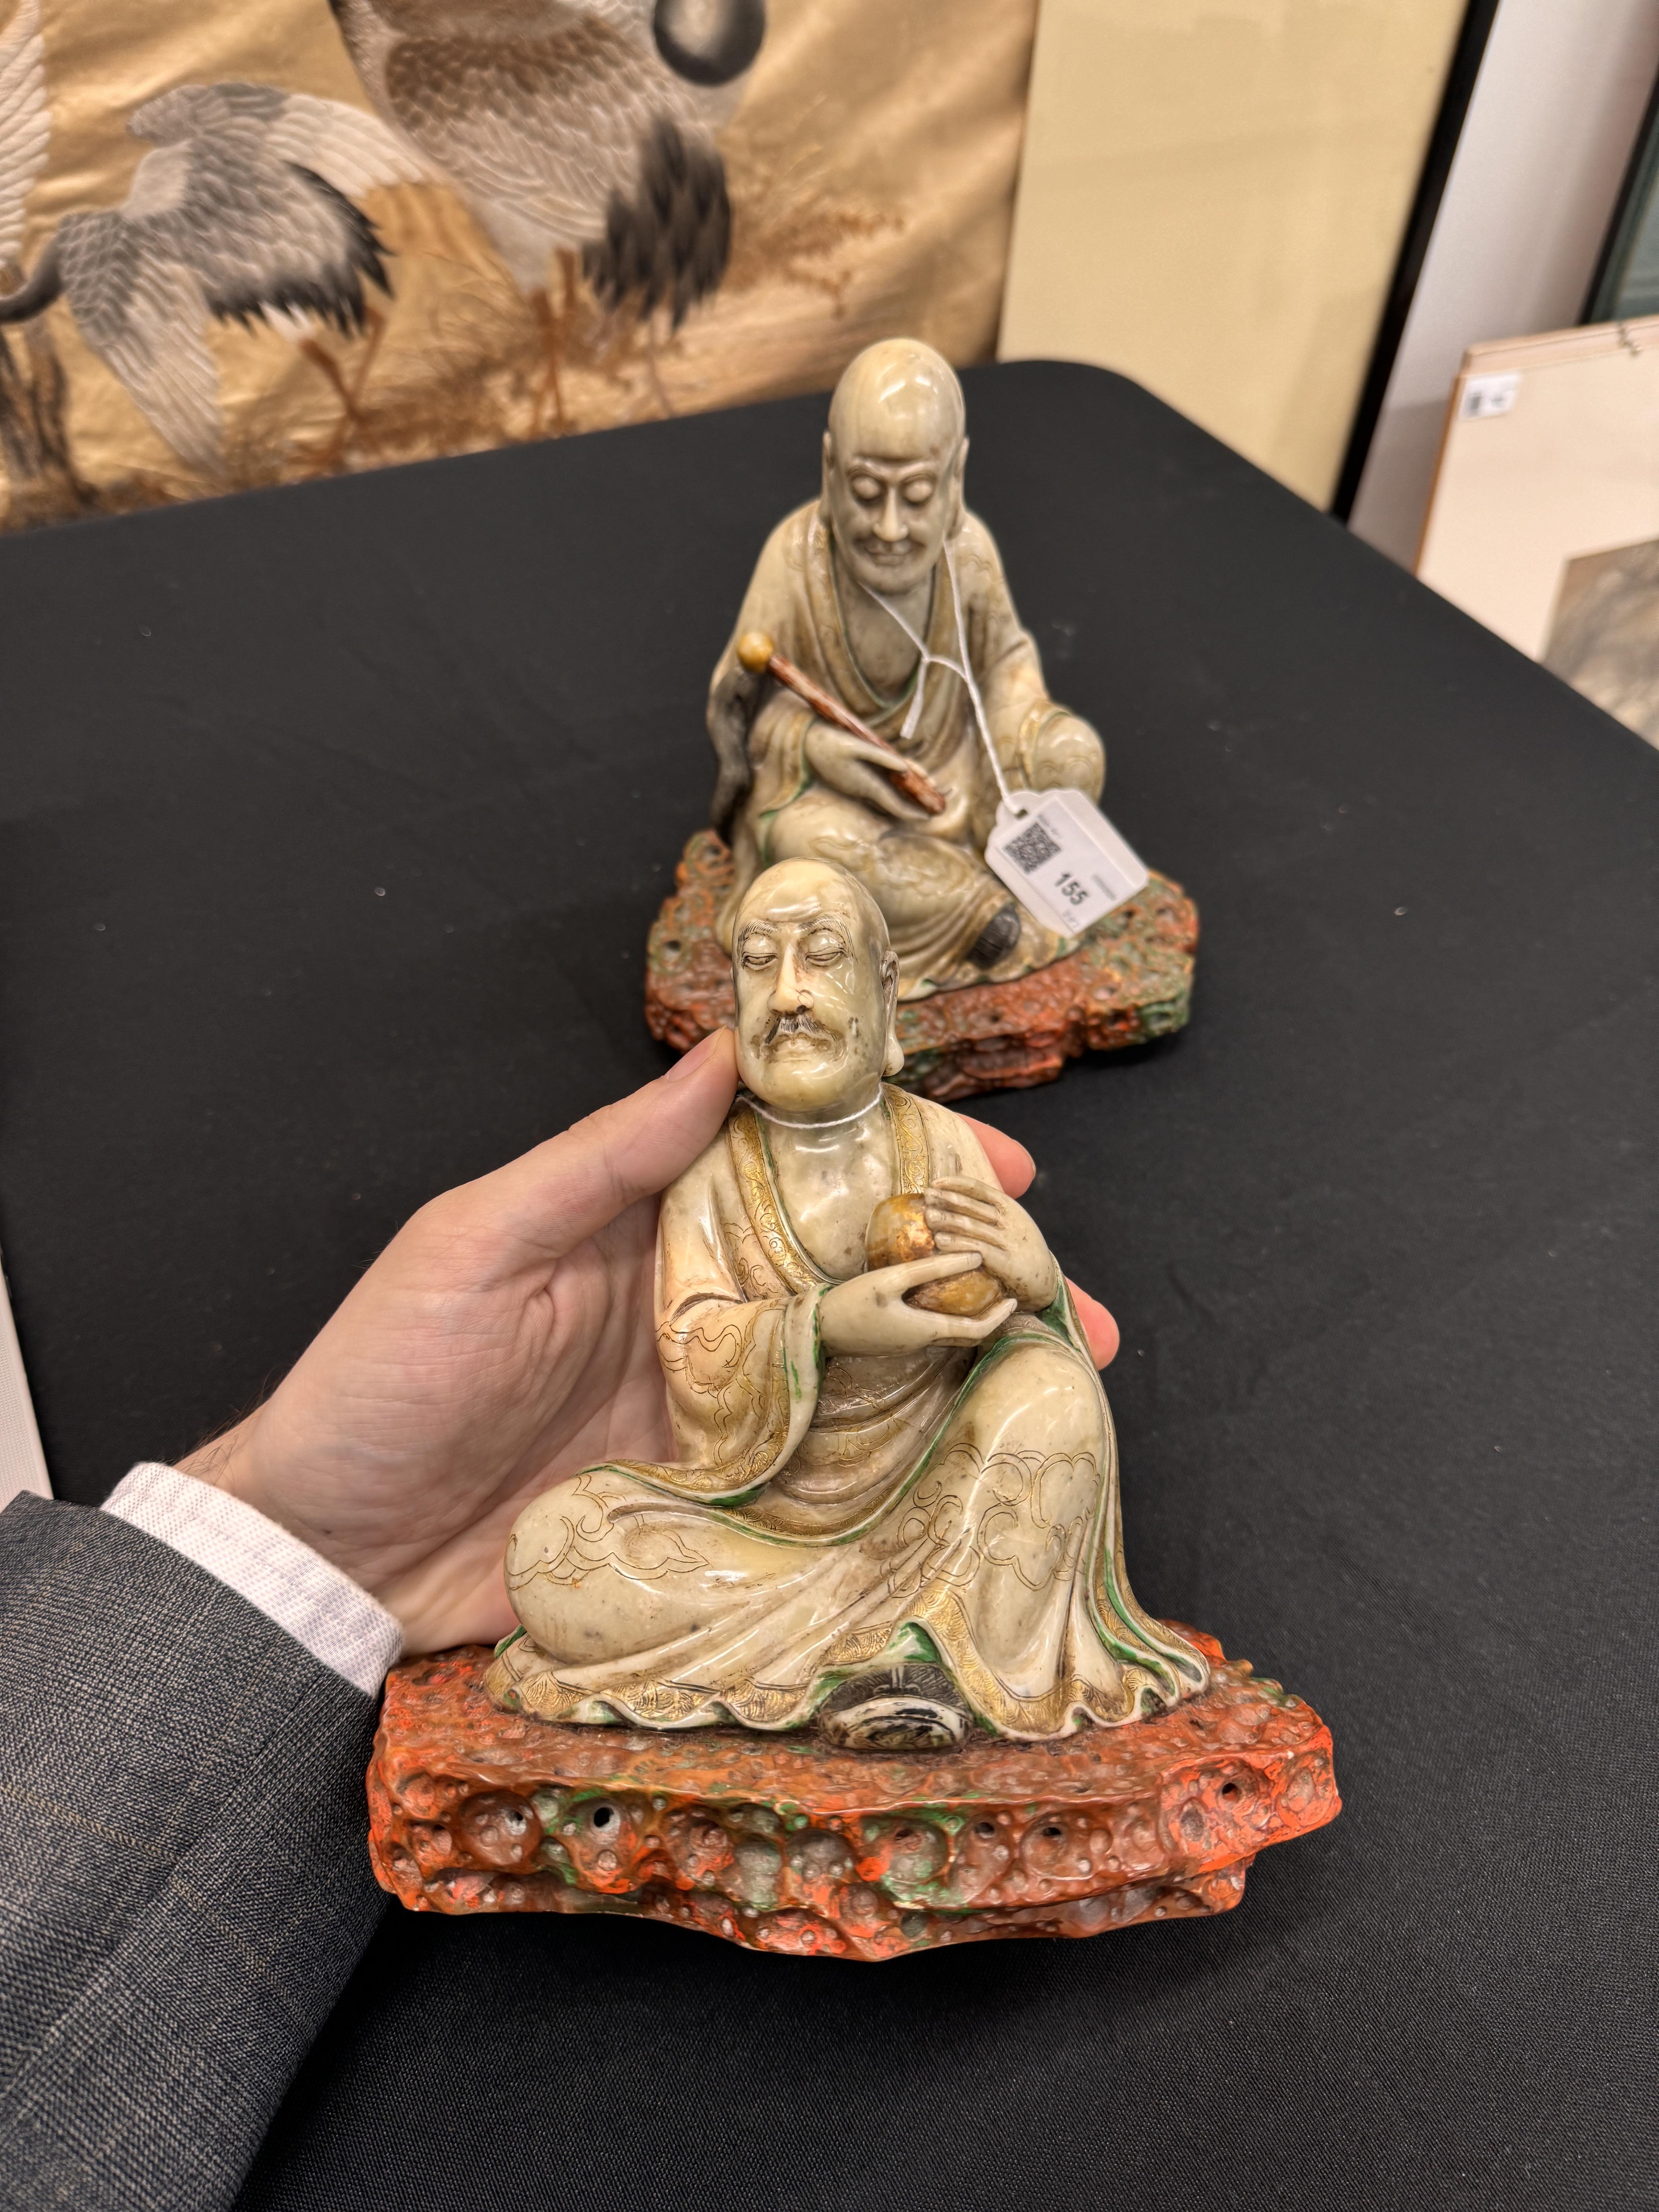 A PAIR OF FINE CHINESE SOAPSTONE 'LUOHAN' FIGURES 清康熙 壽山石羅漢坐像一對 - Image 20 of 24